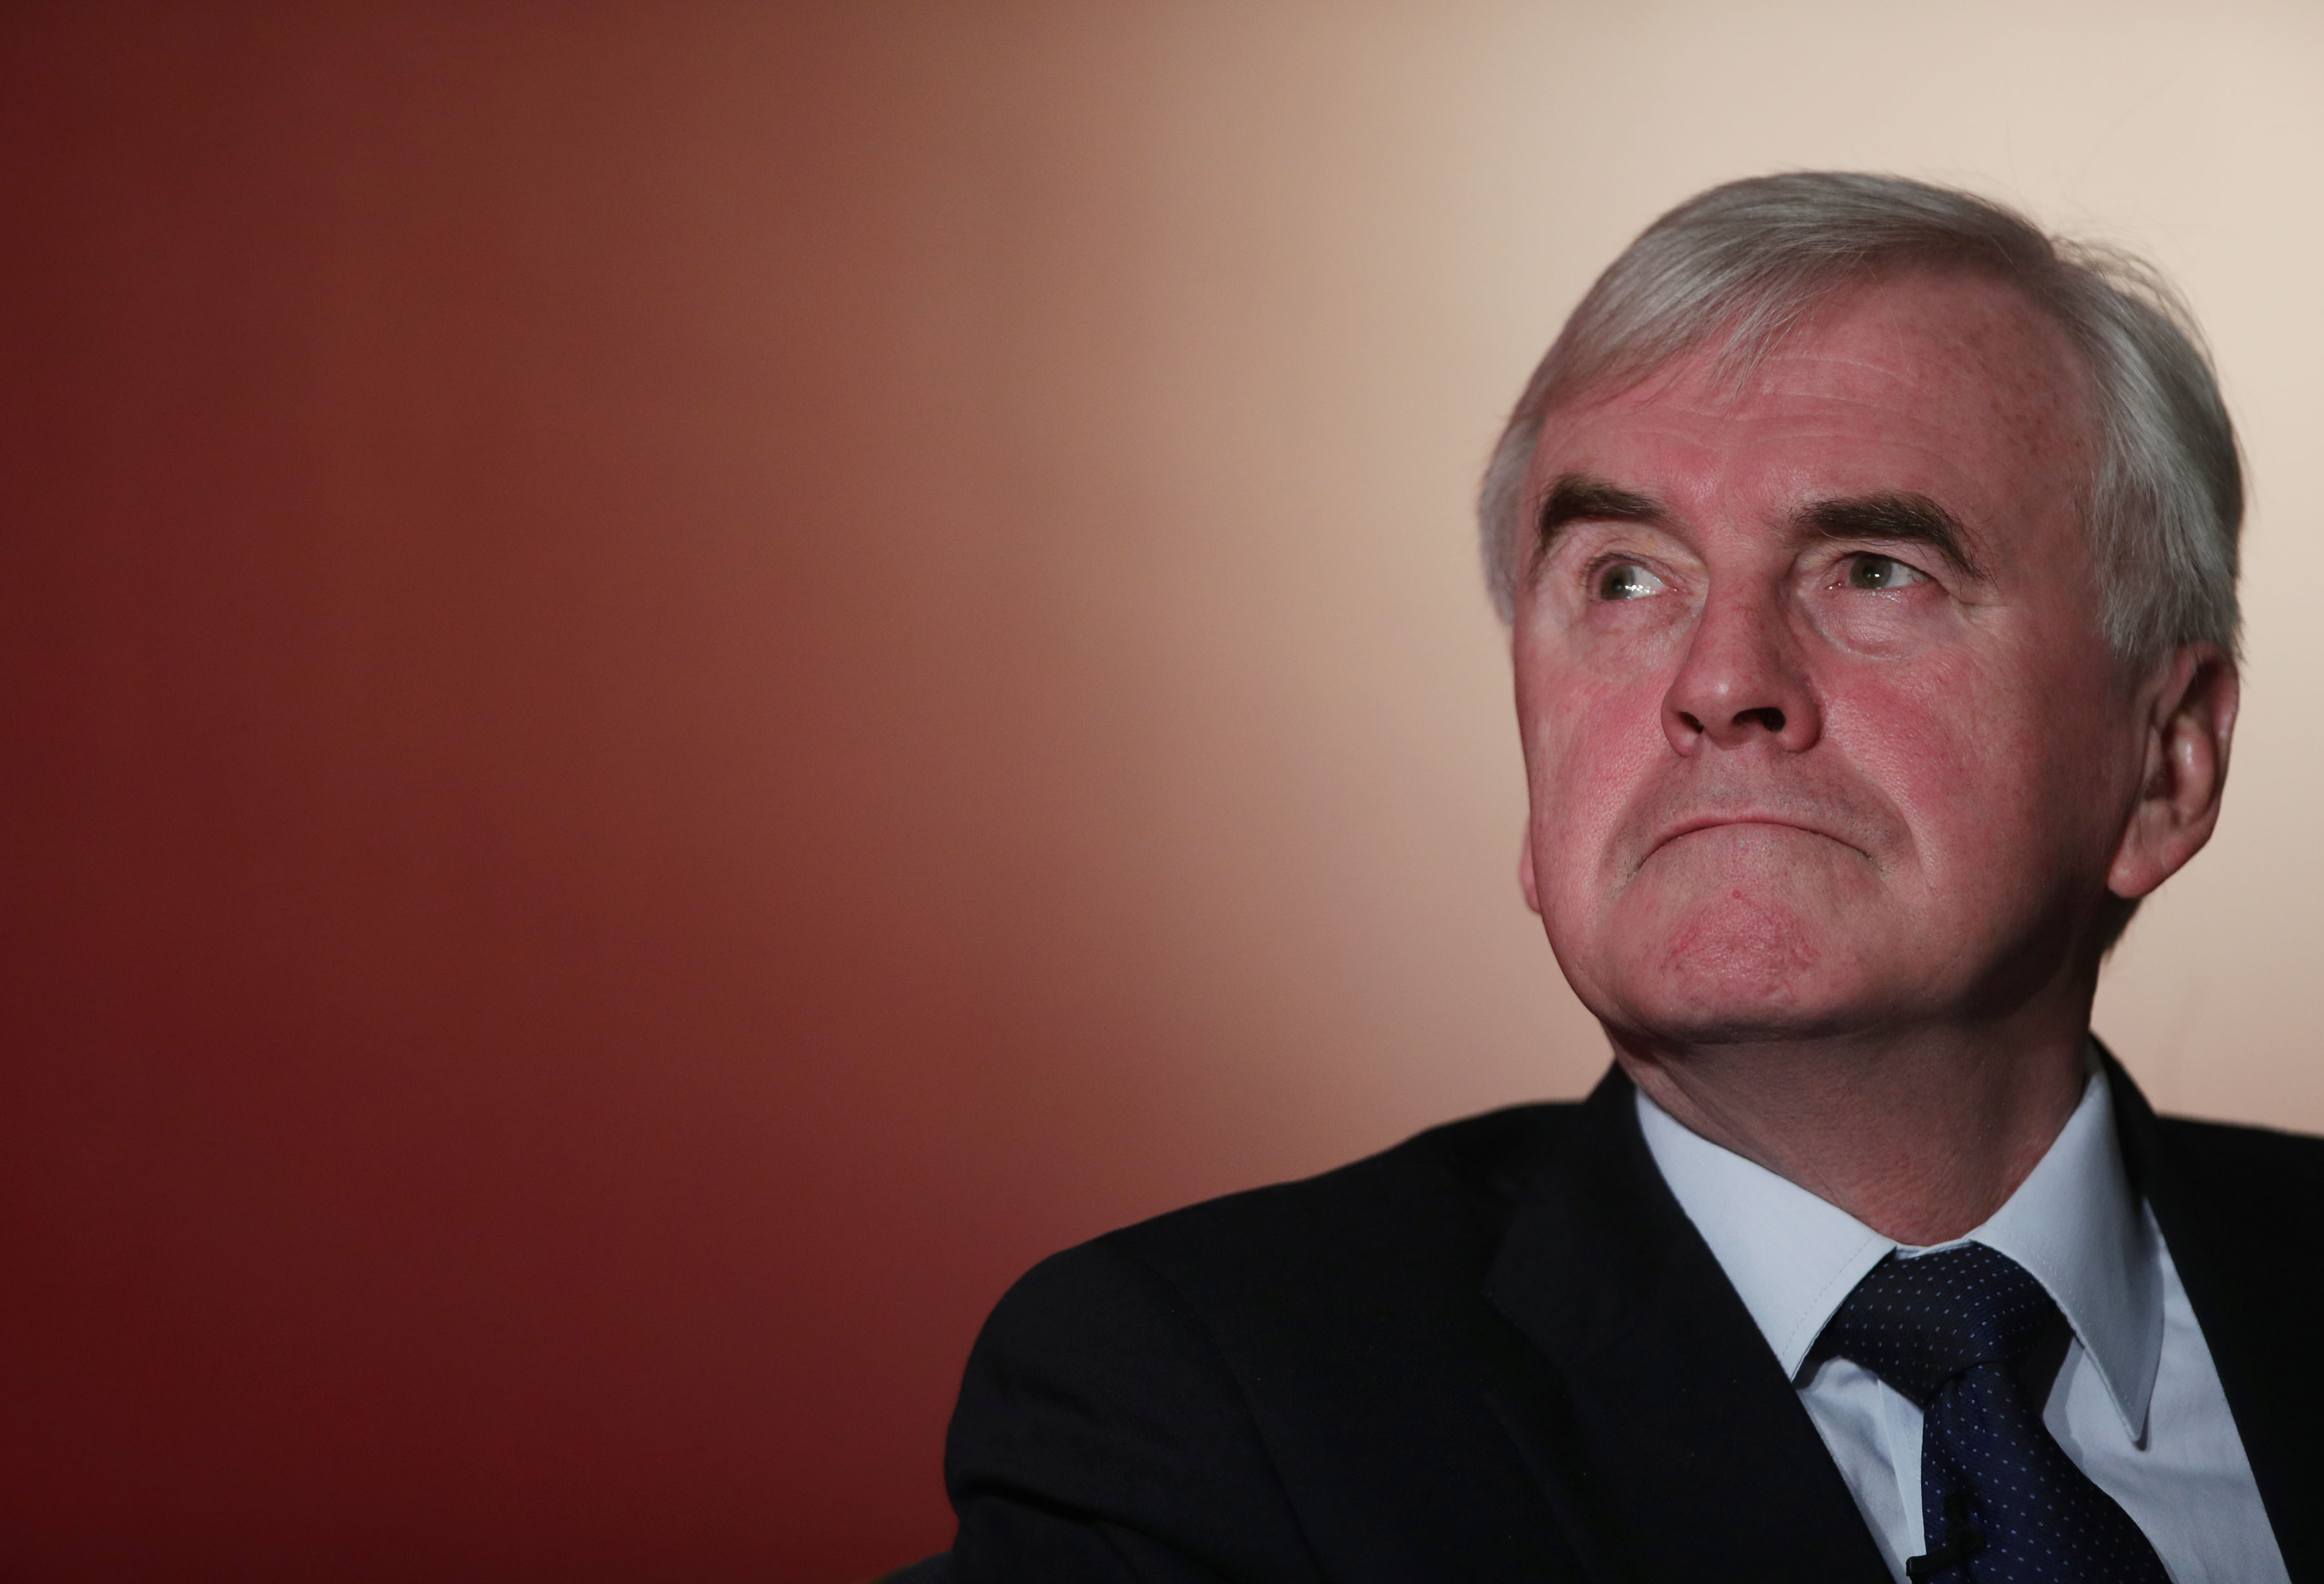 Shadow chancellor John McDonnell attending a Labour Party conference on alternative models of ownership at the De Vere Grand Connaught Rooms in central London (Yui Mok/PA)